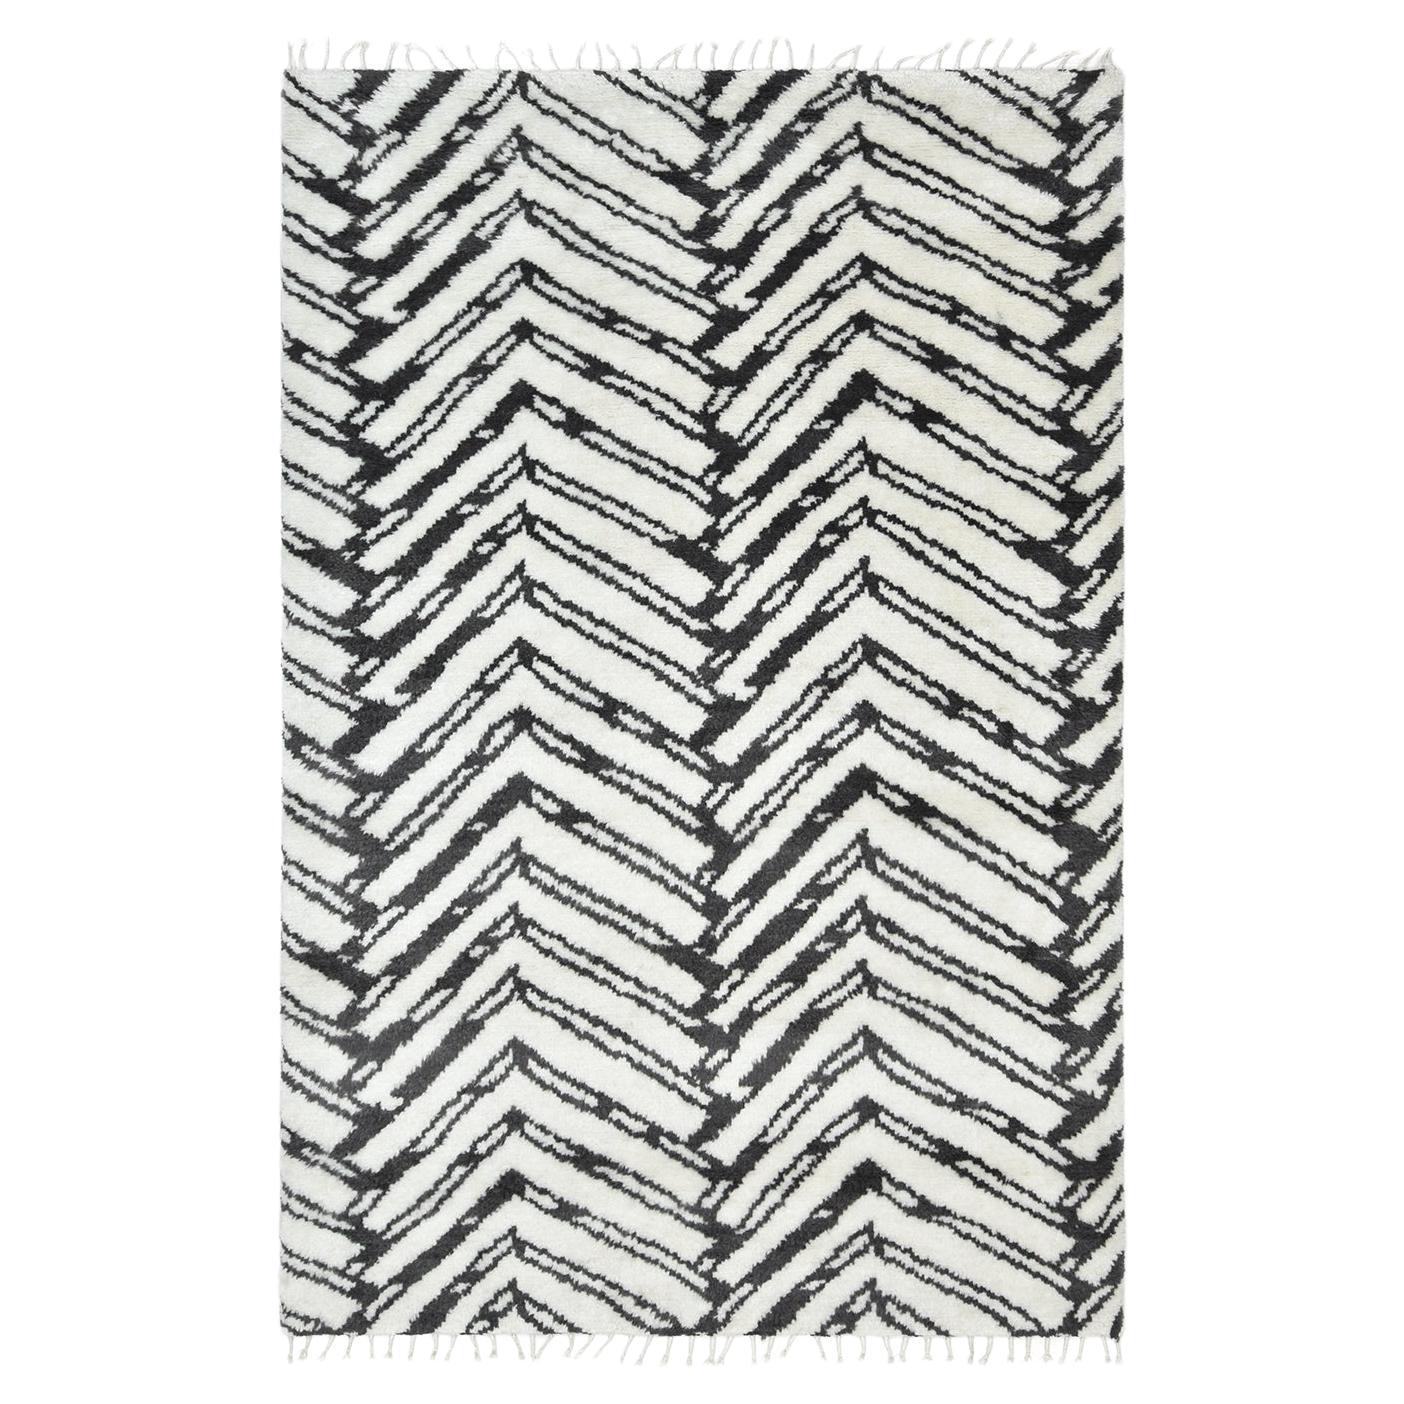 Solo Rugs Moroccan Chevron Hand Woven Ivory Area Rug For Sale